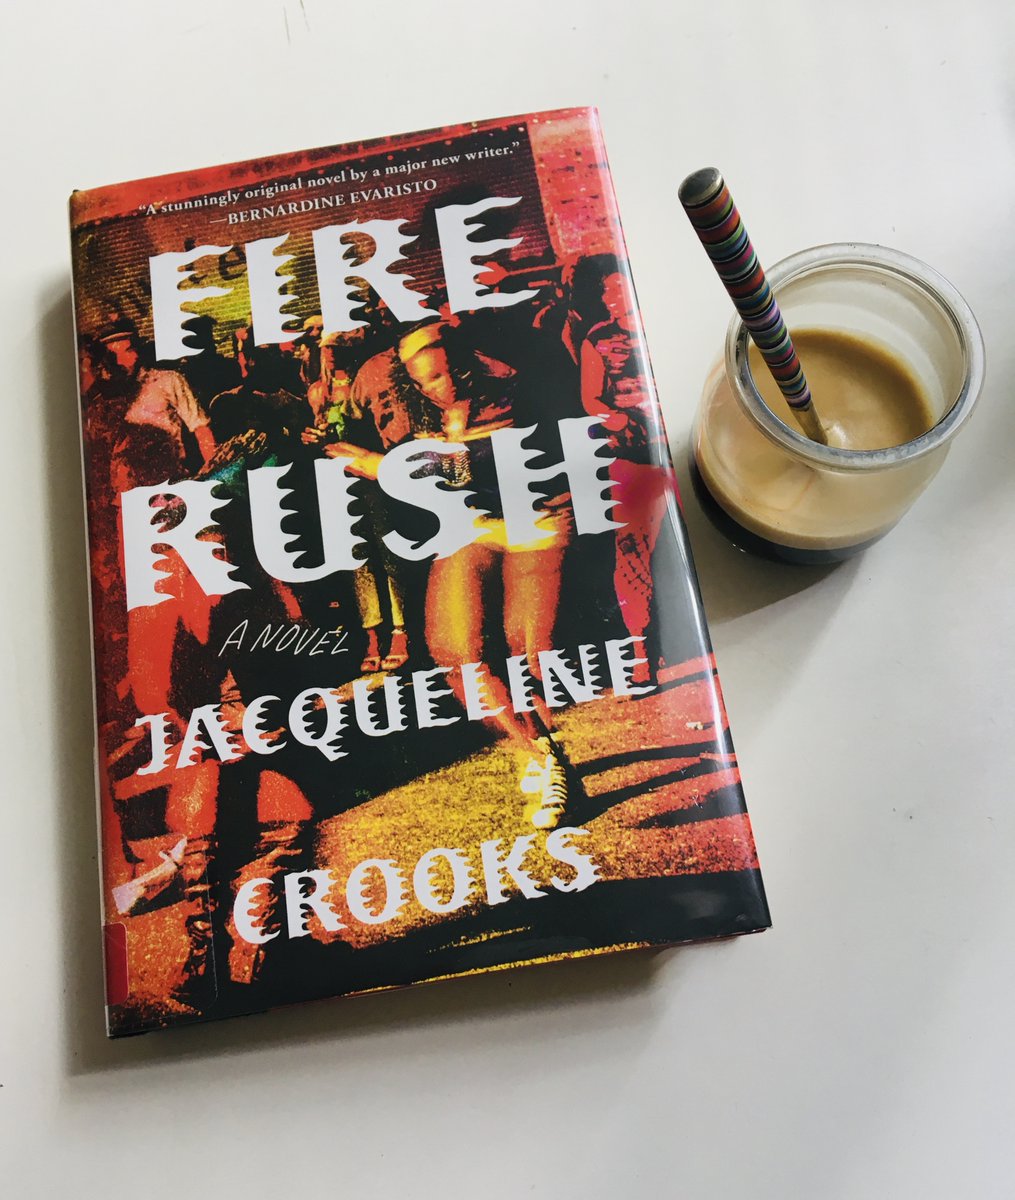 As someone who was born in 1977, I was a tad peeved to find out that a book set in 1978-1982 is described as a #historicalnovel. And yet here we are. #FireRush #petipawreads